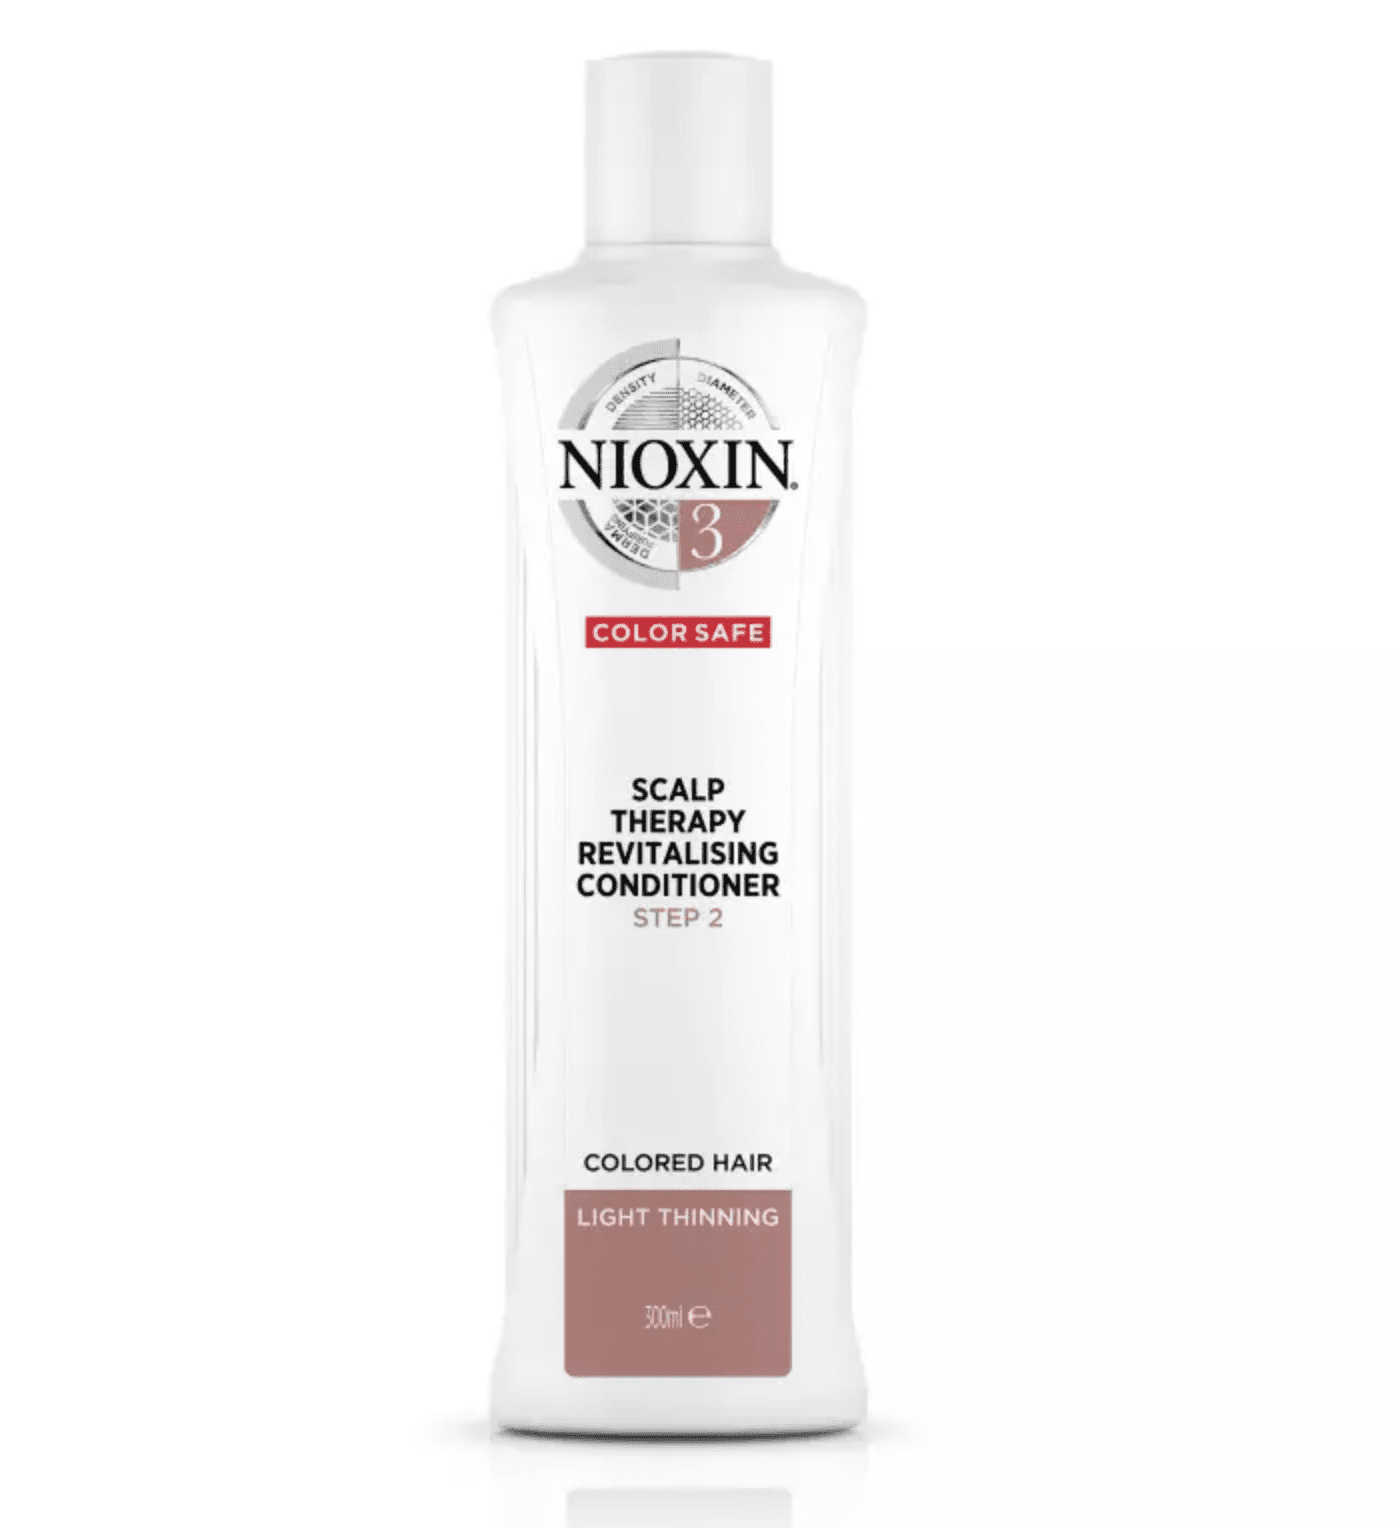 Nioxin System 3 Scalp Therapy Revitalizing Conditioner 300ml